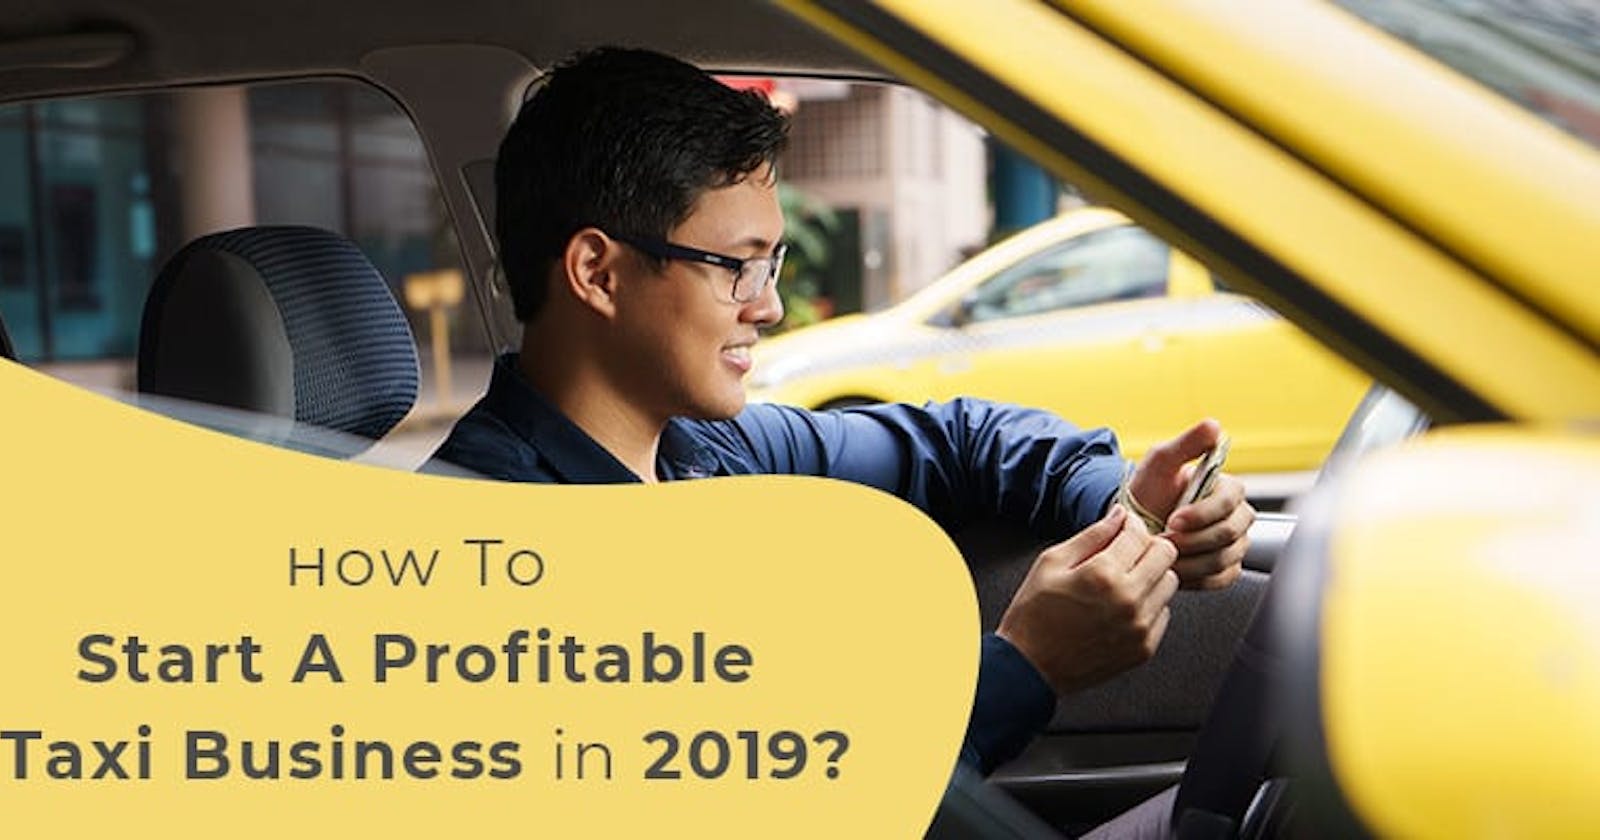 How To Start A Profitable Taxi Business in 2019